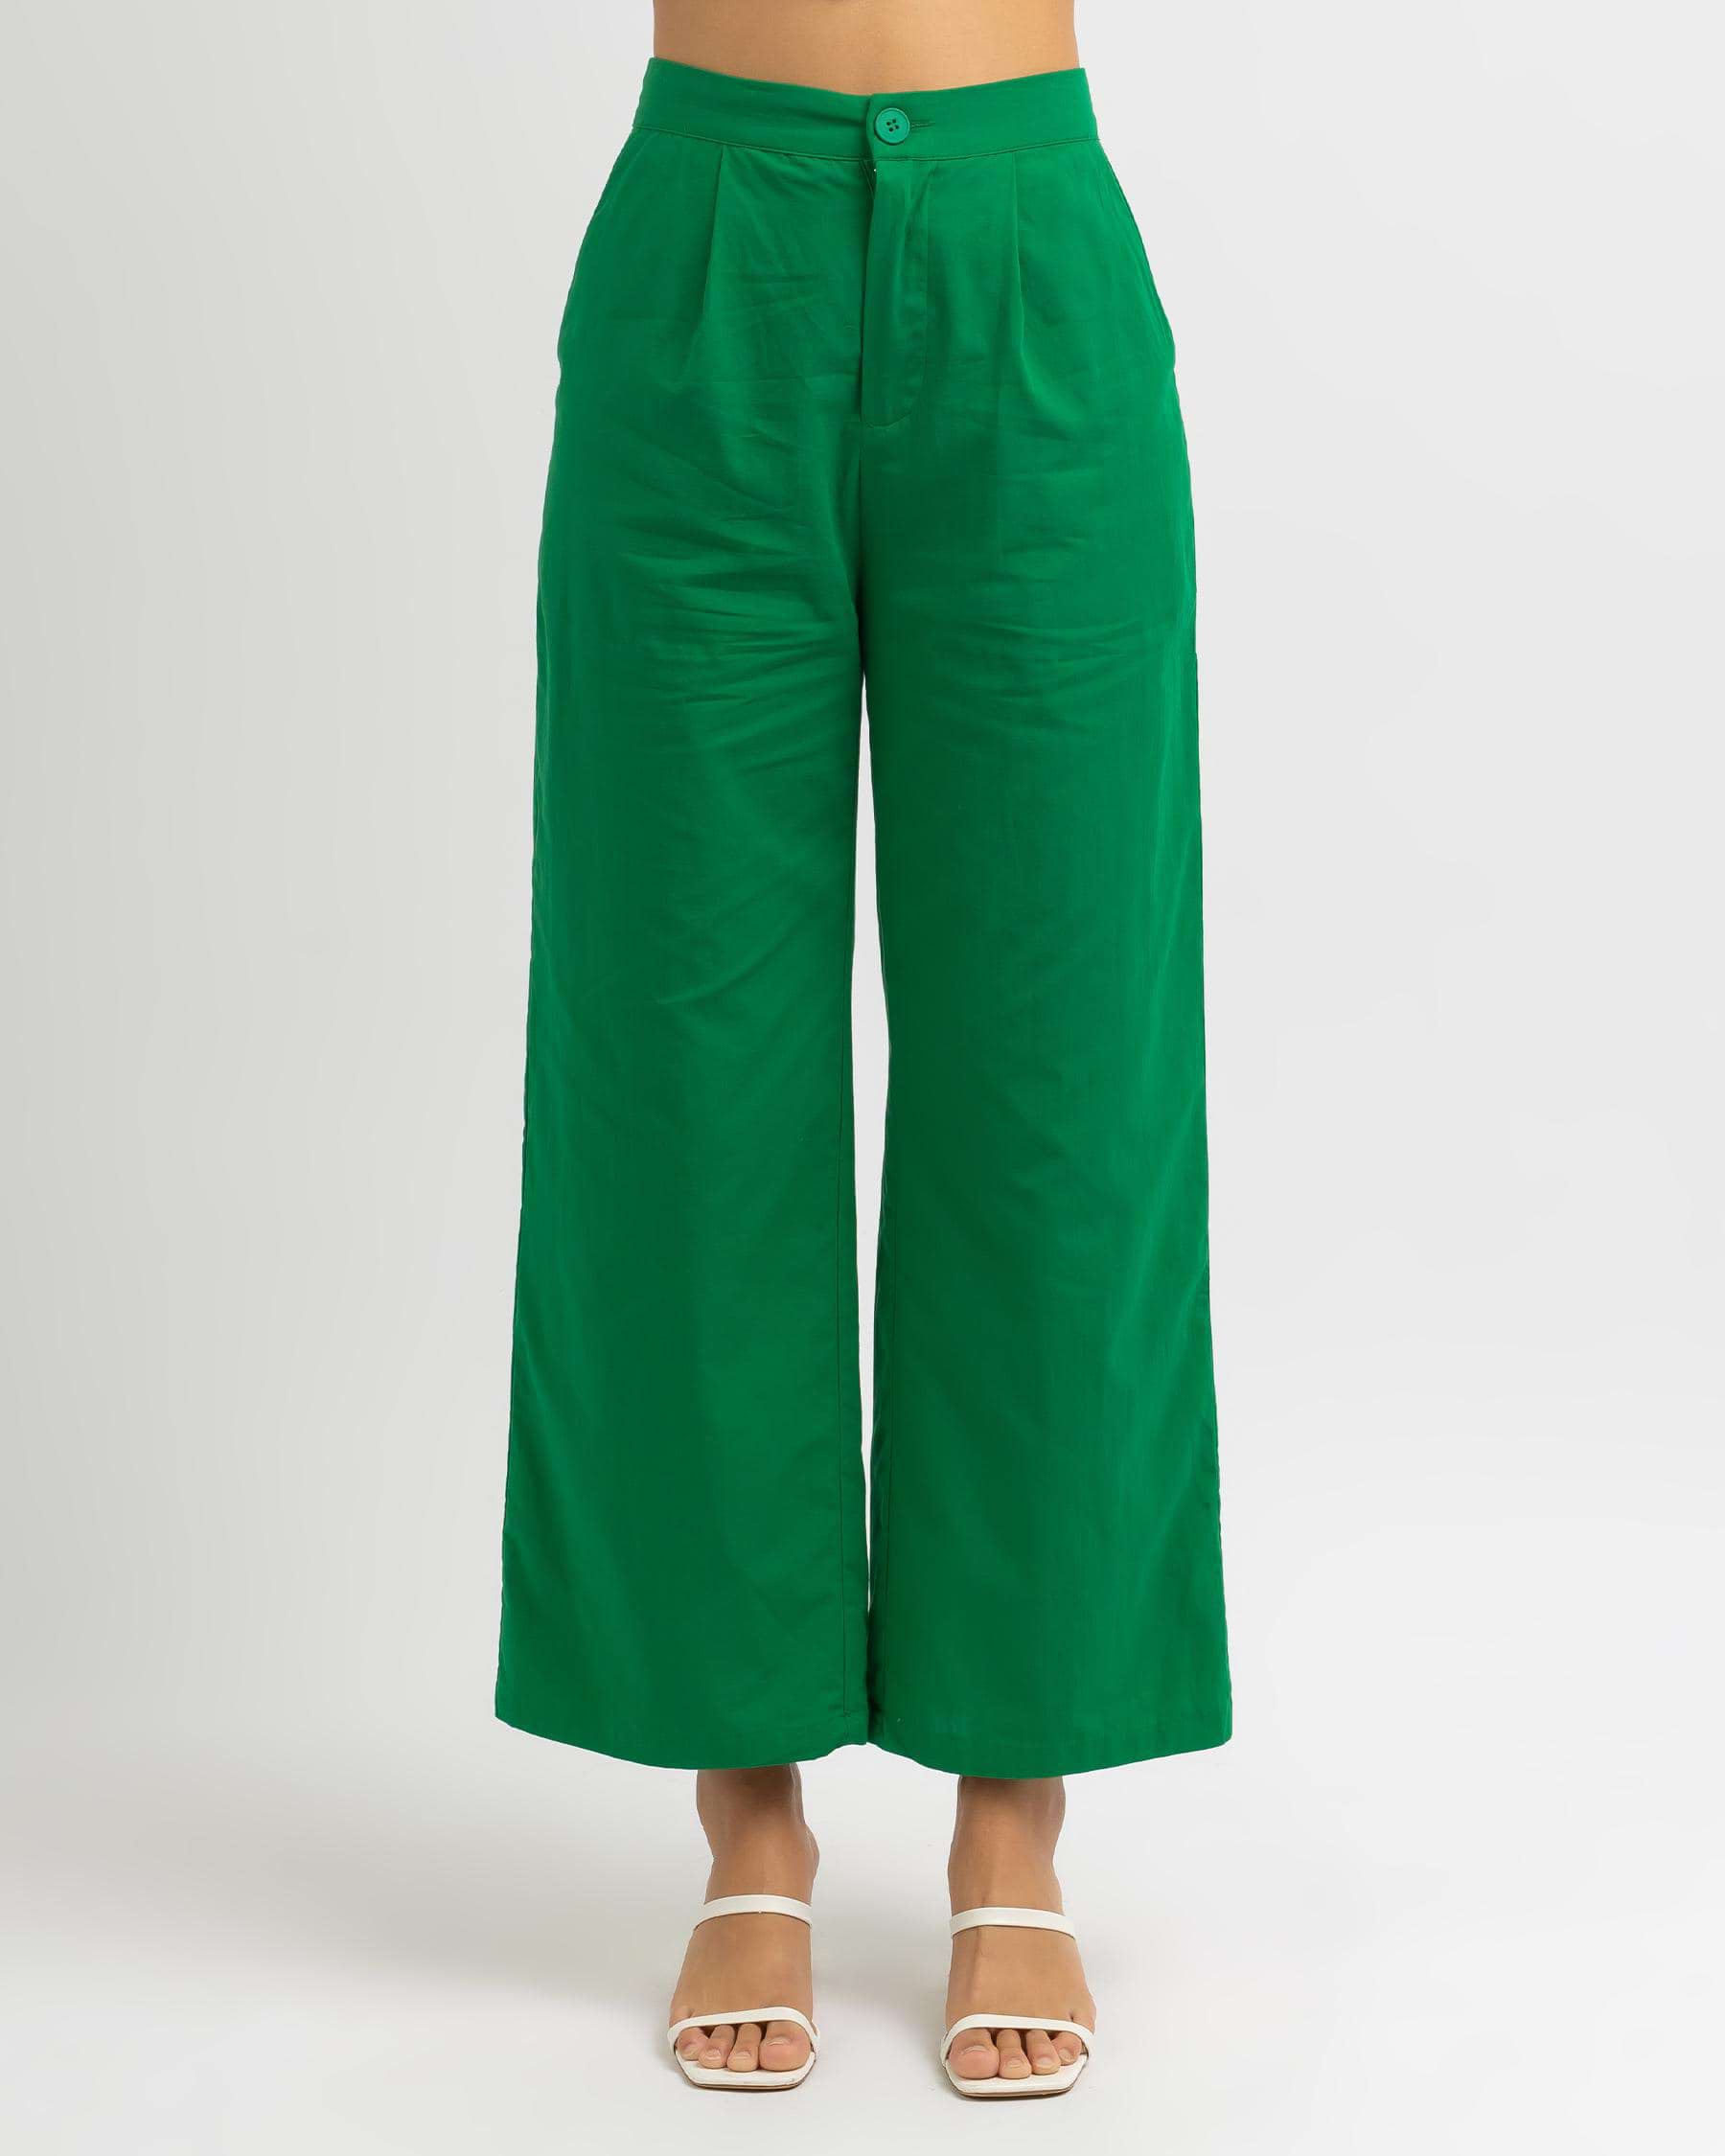 Shop Winnie & Co So Fly Pants In Green - Fast Shipping & Easy Returns ...